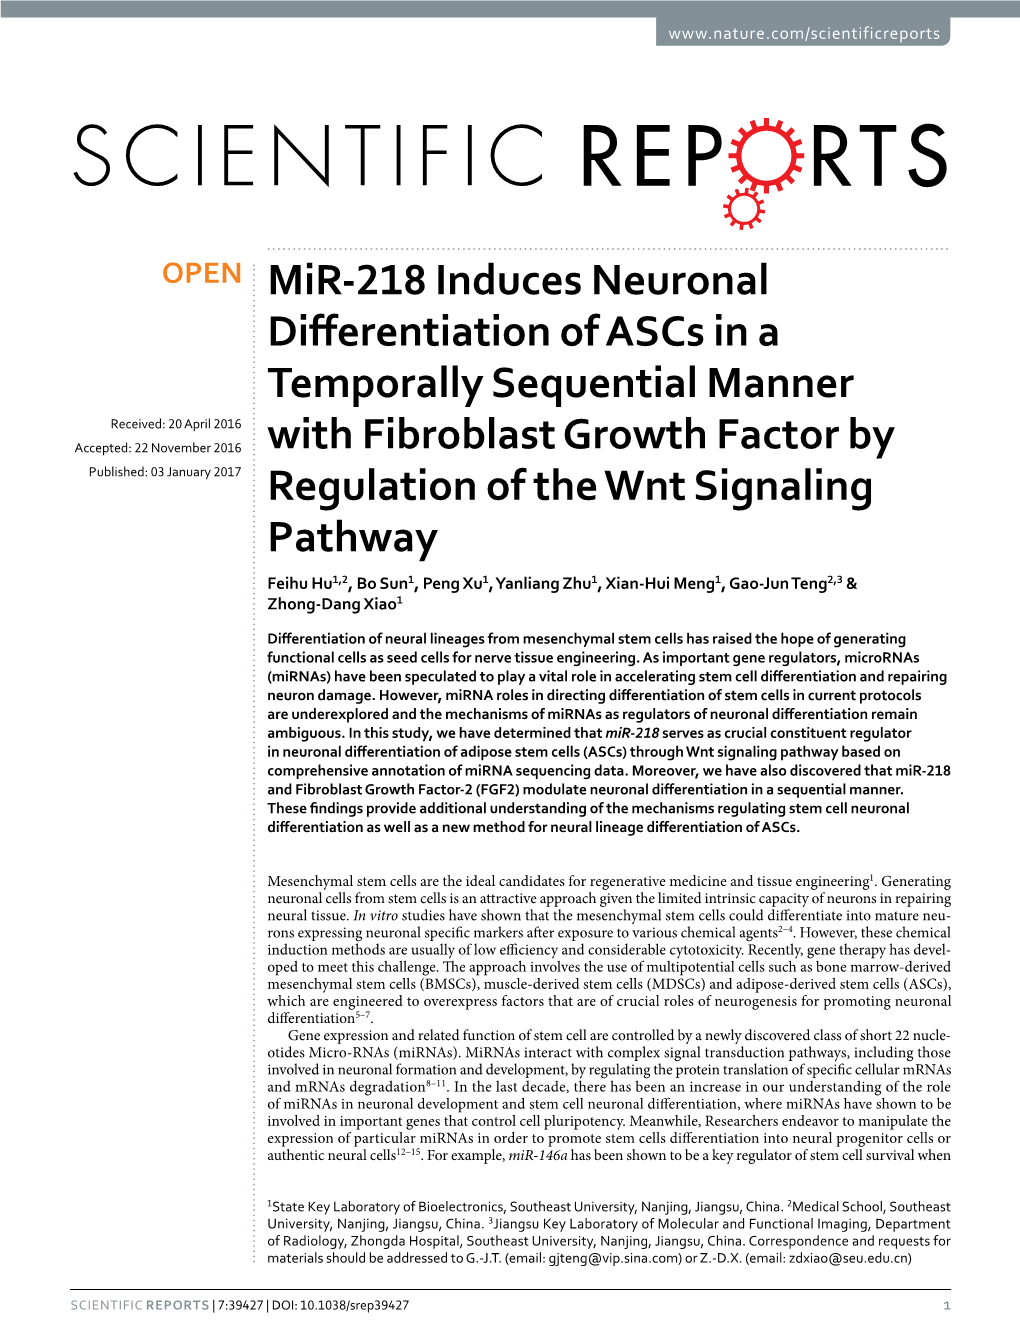 Mir-218 Induces Neuronal Differentiation of Ascs in A